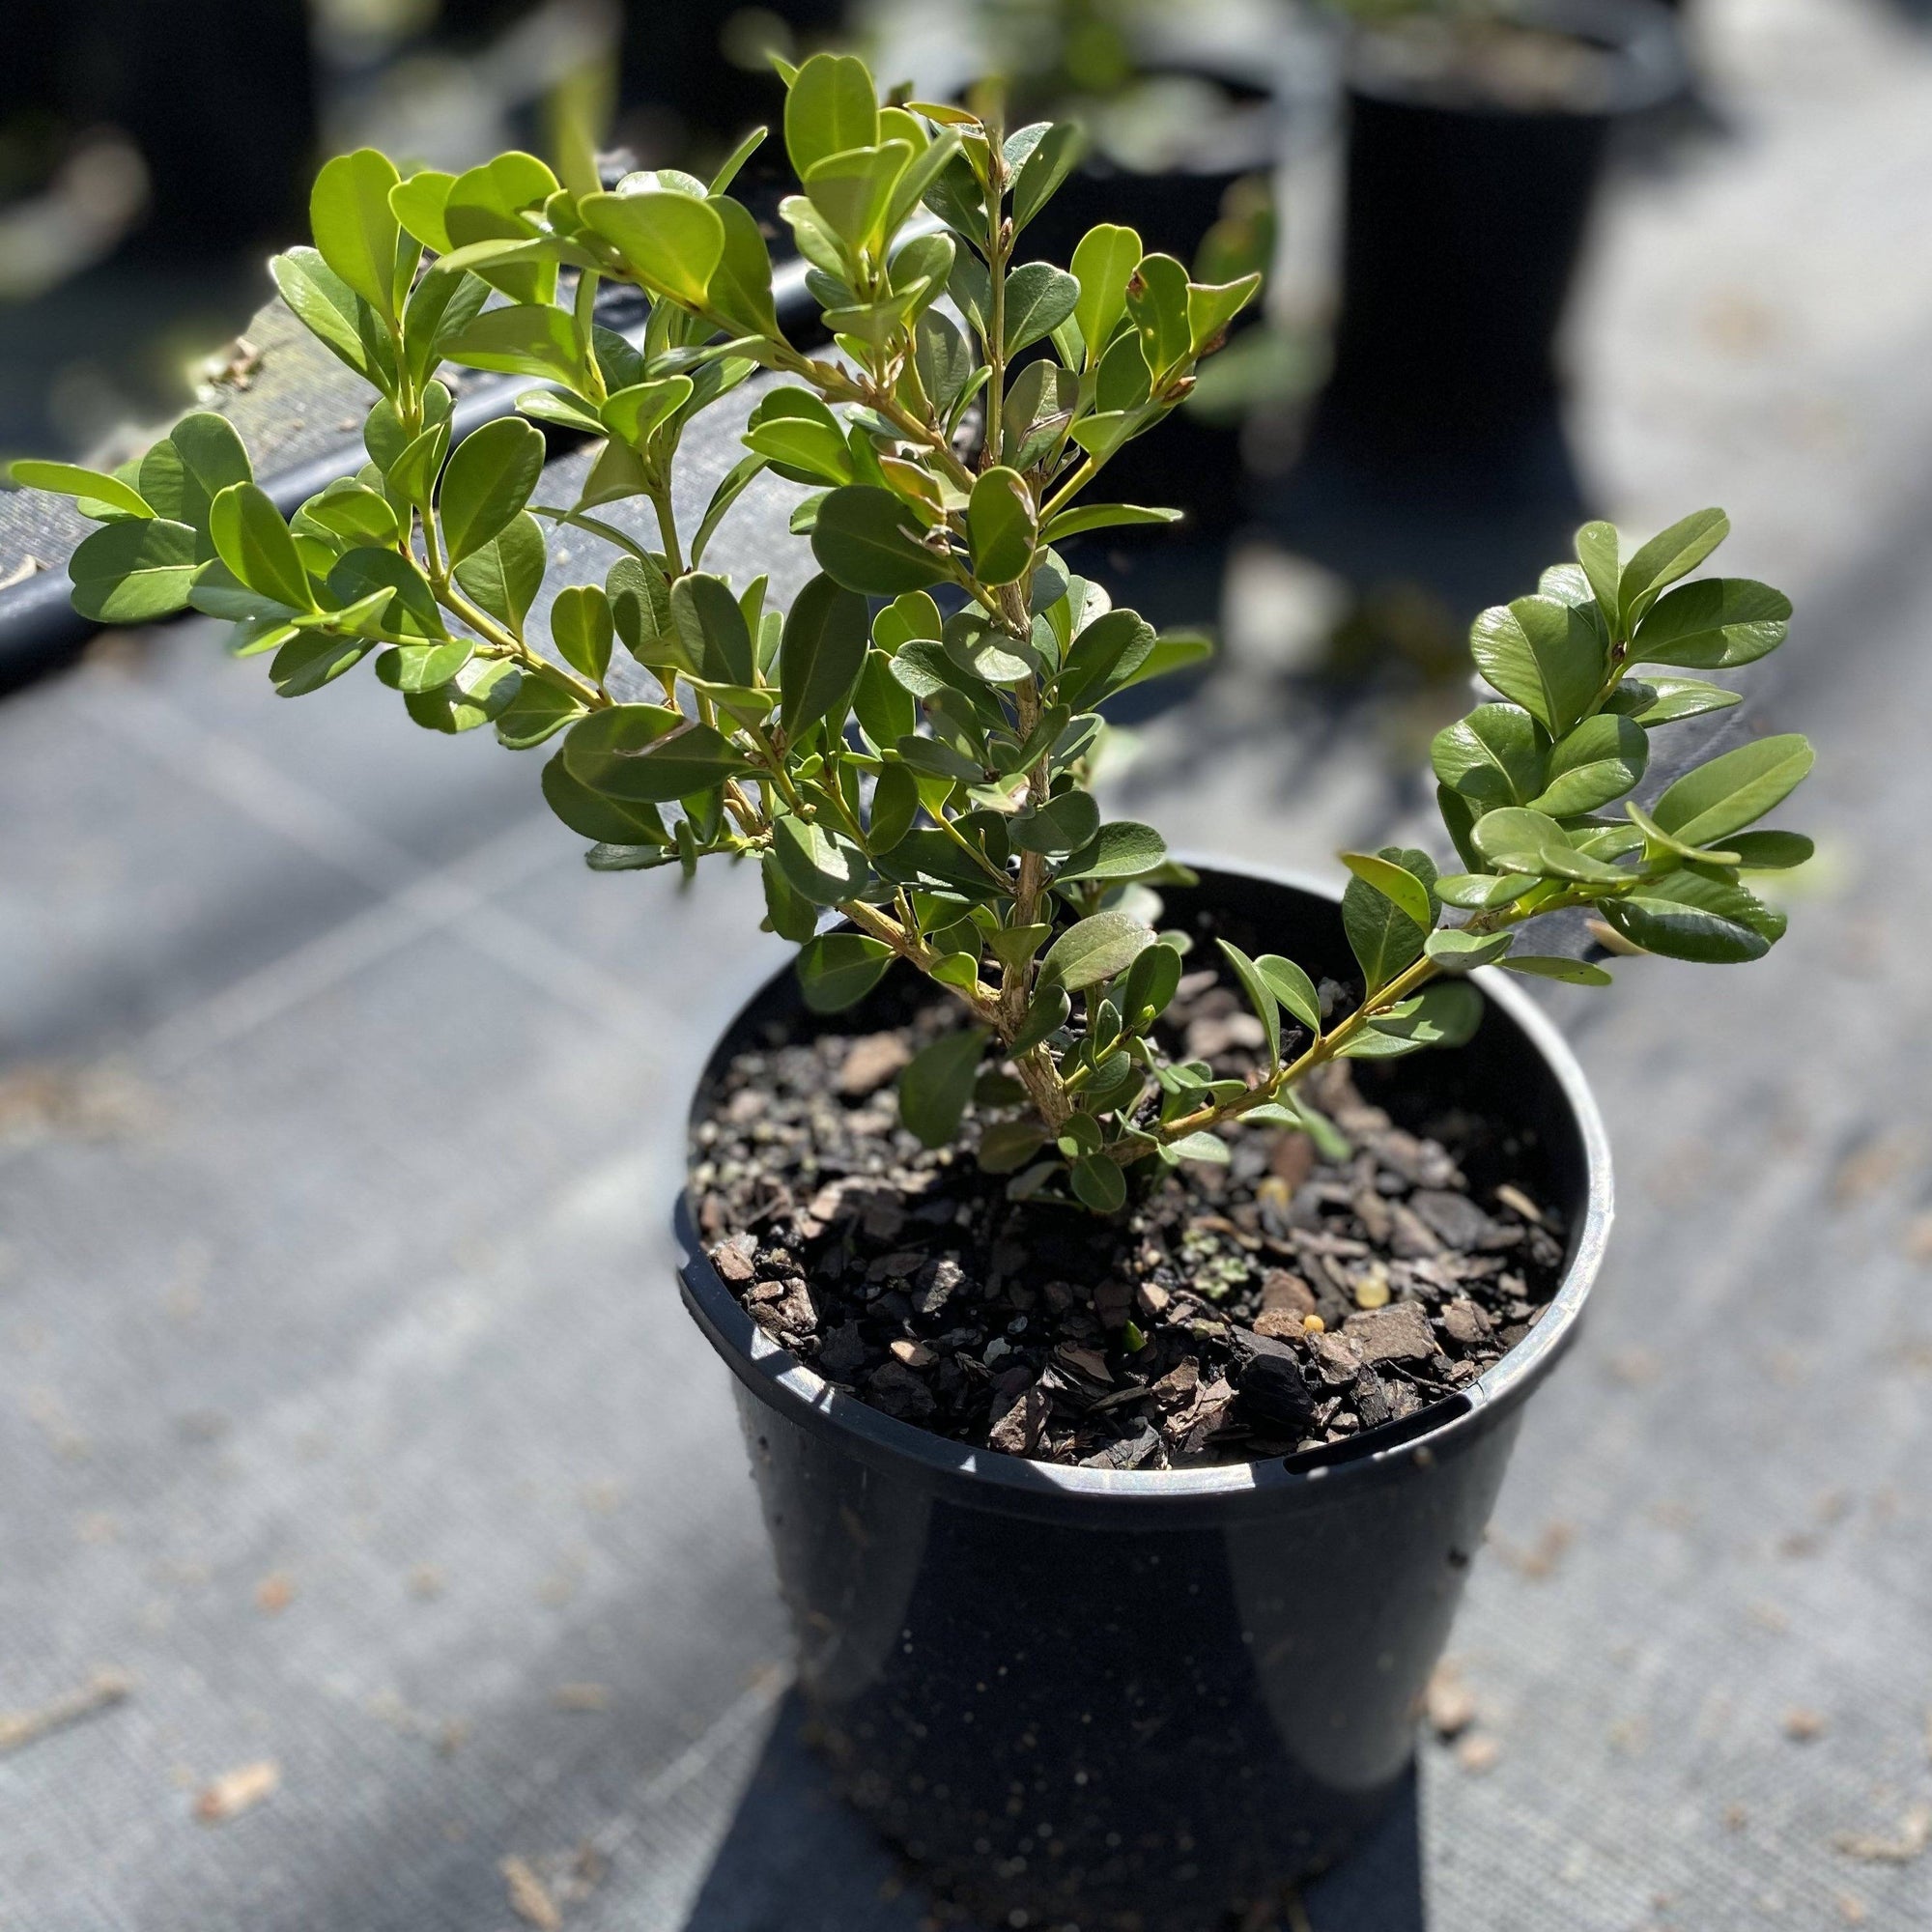 Buxus microphylla Japonica is a very sturdy evergreen shrub that makes an excellent dense screen or hedge